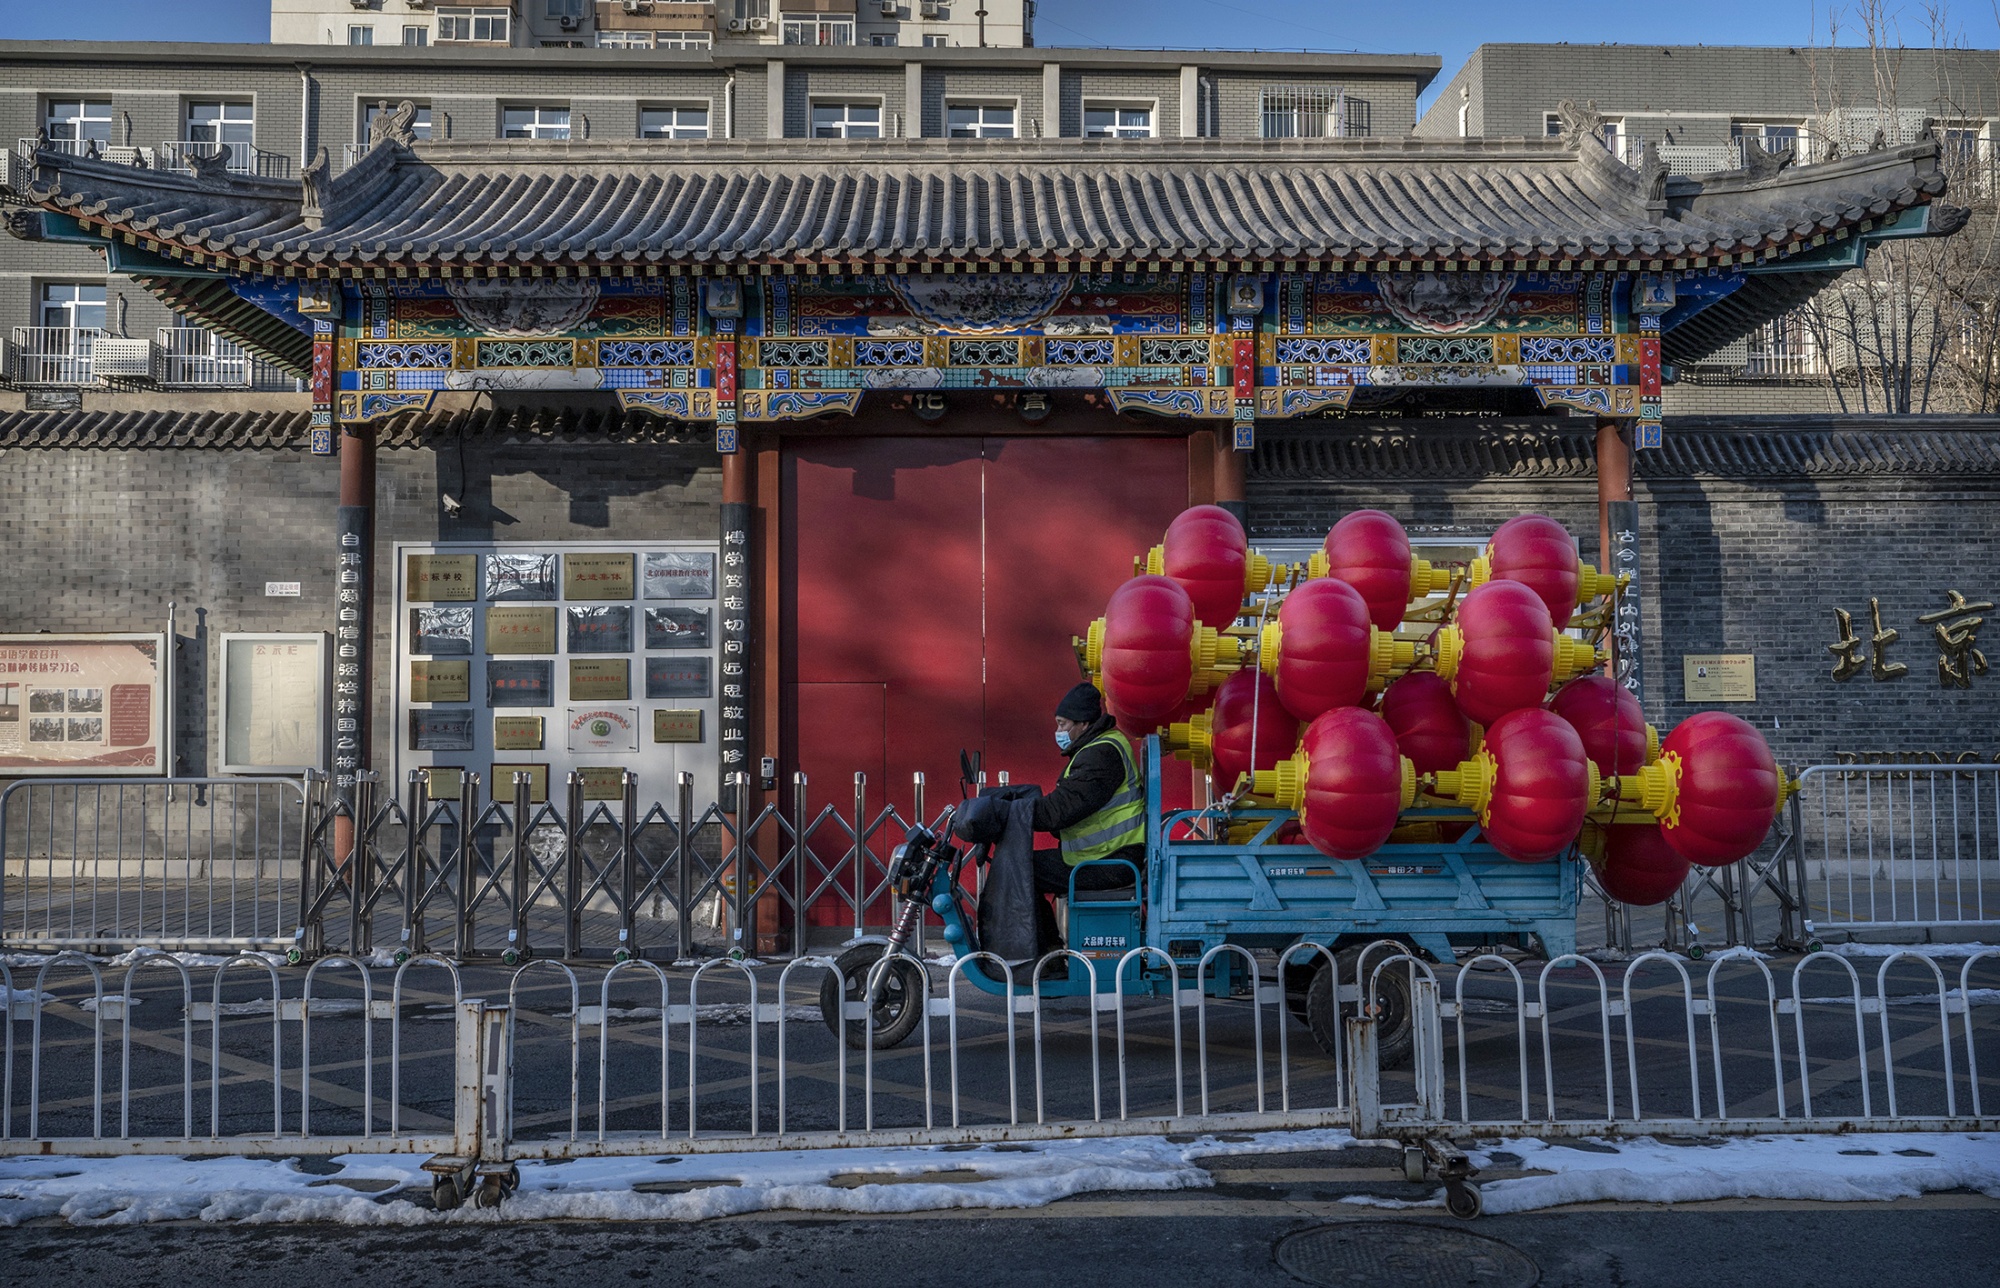 A worker carries red lanterns to be hung from streetlights ahead of Lunar New Year in Beijing on Jan. 27.